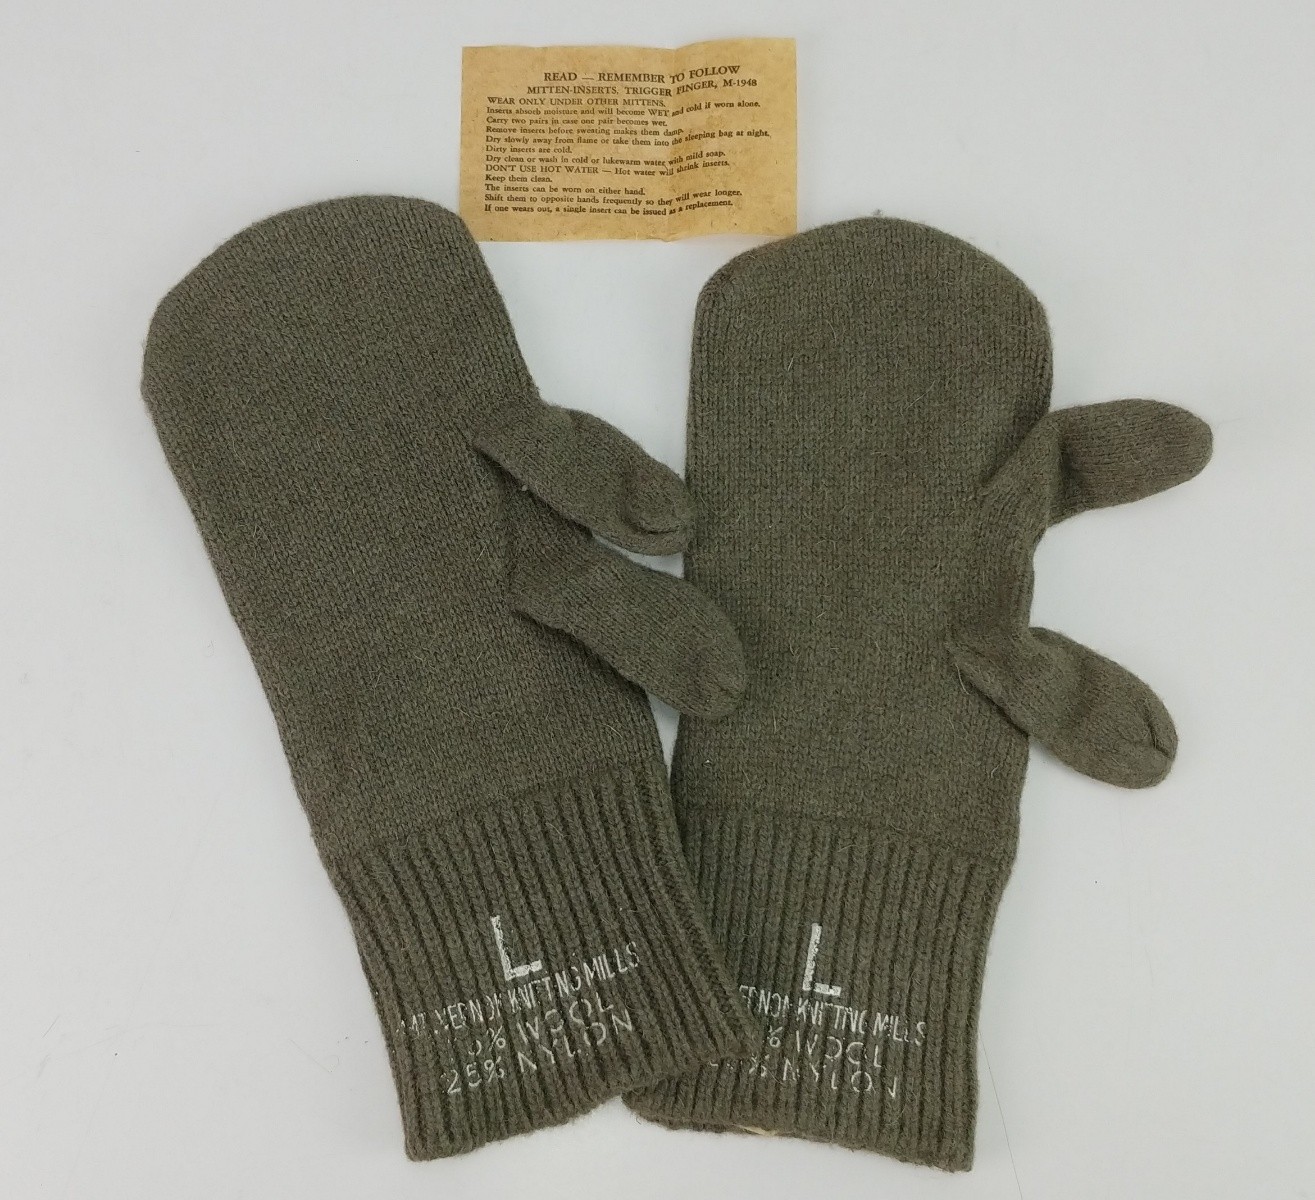  Trigger Finger Mitten Inserts Size Large Pair New